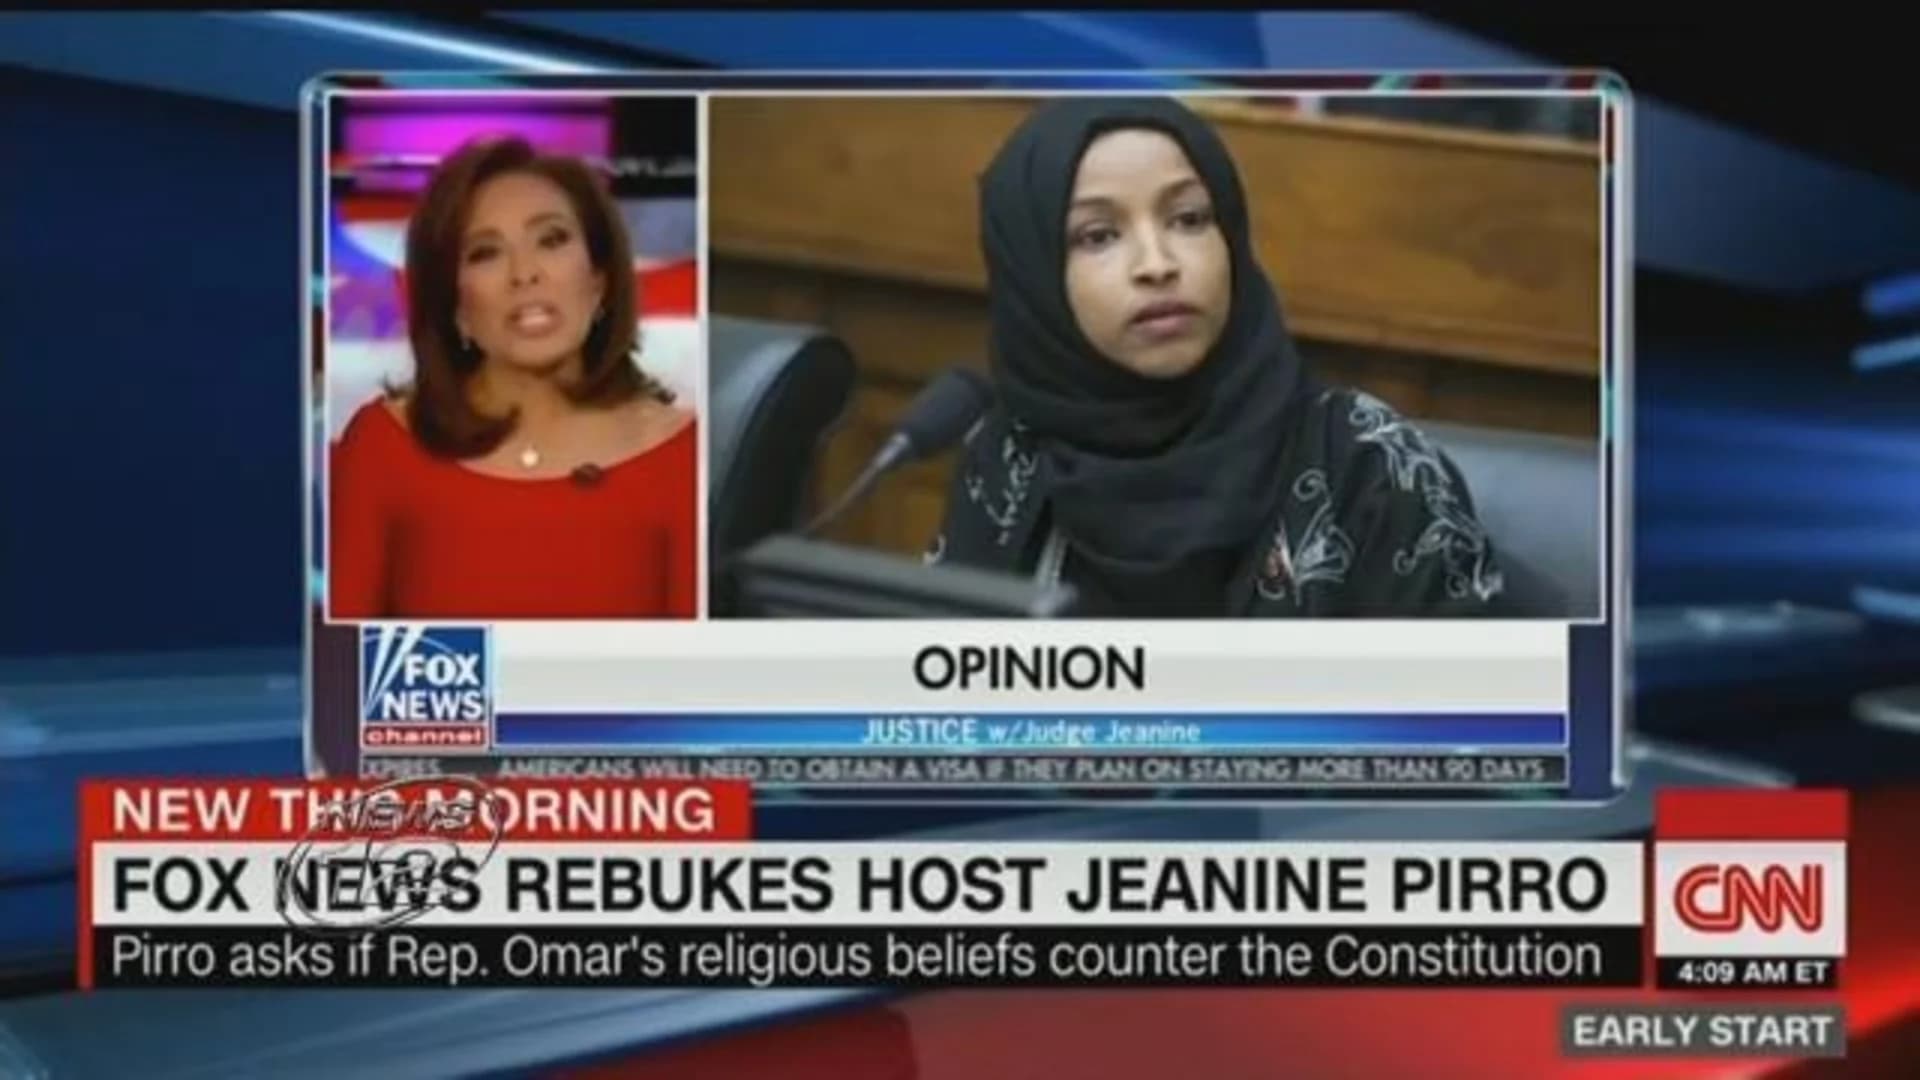 Pirro's show not on Fox lineup, week after Omar comments